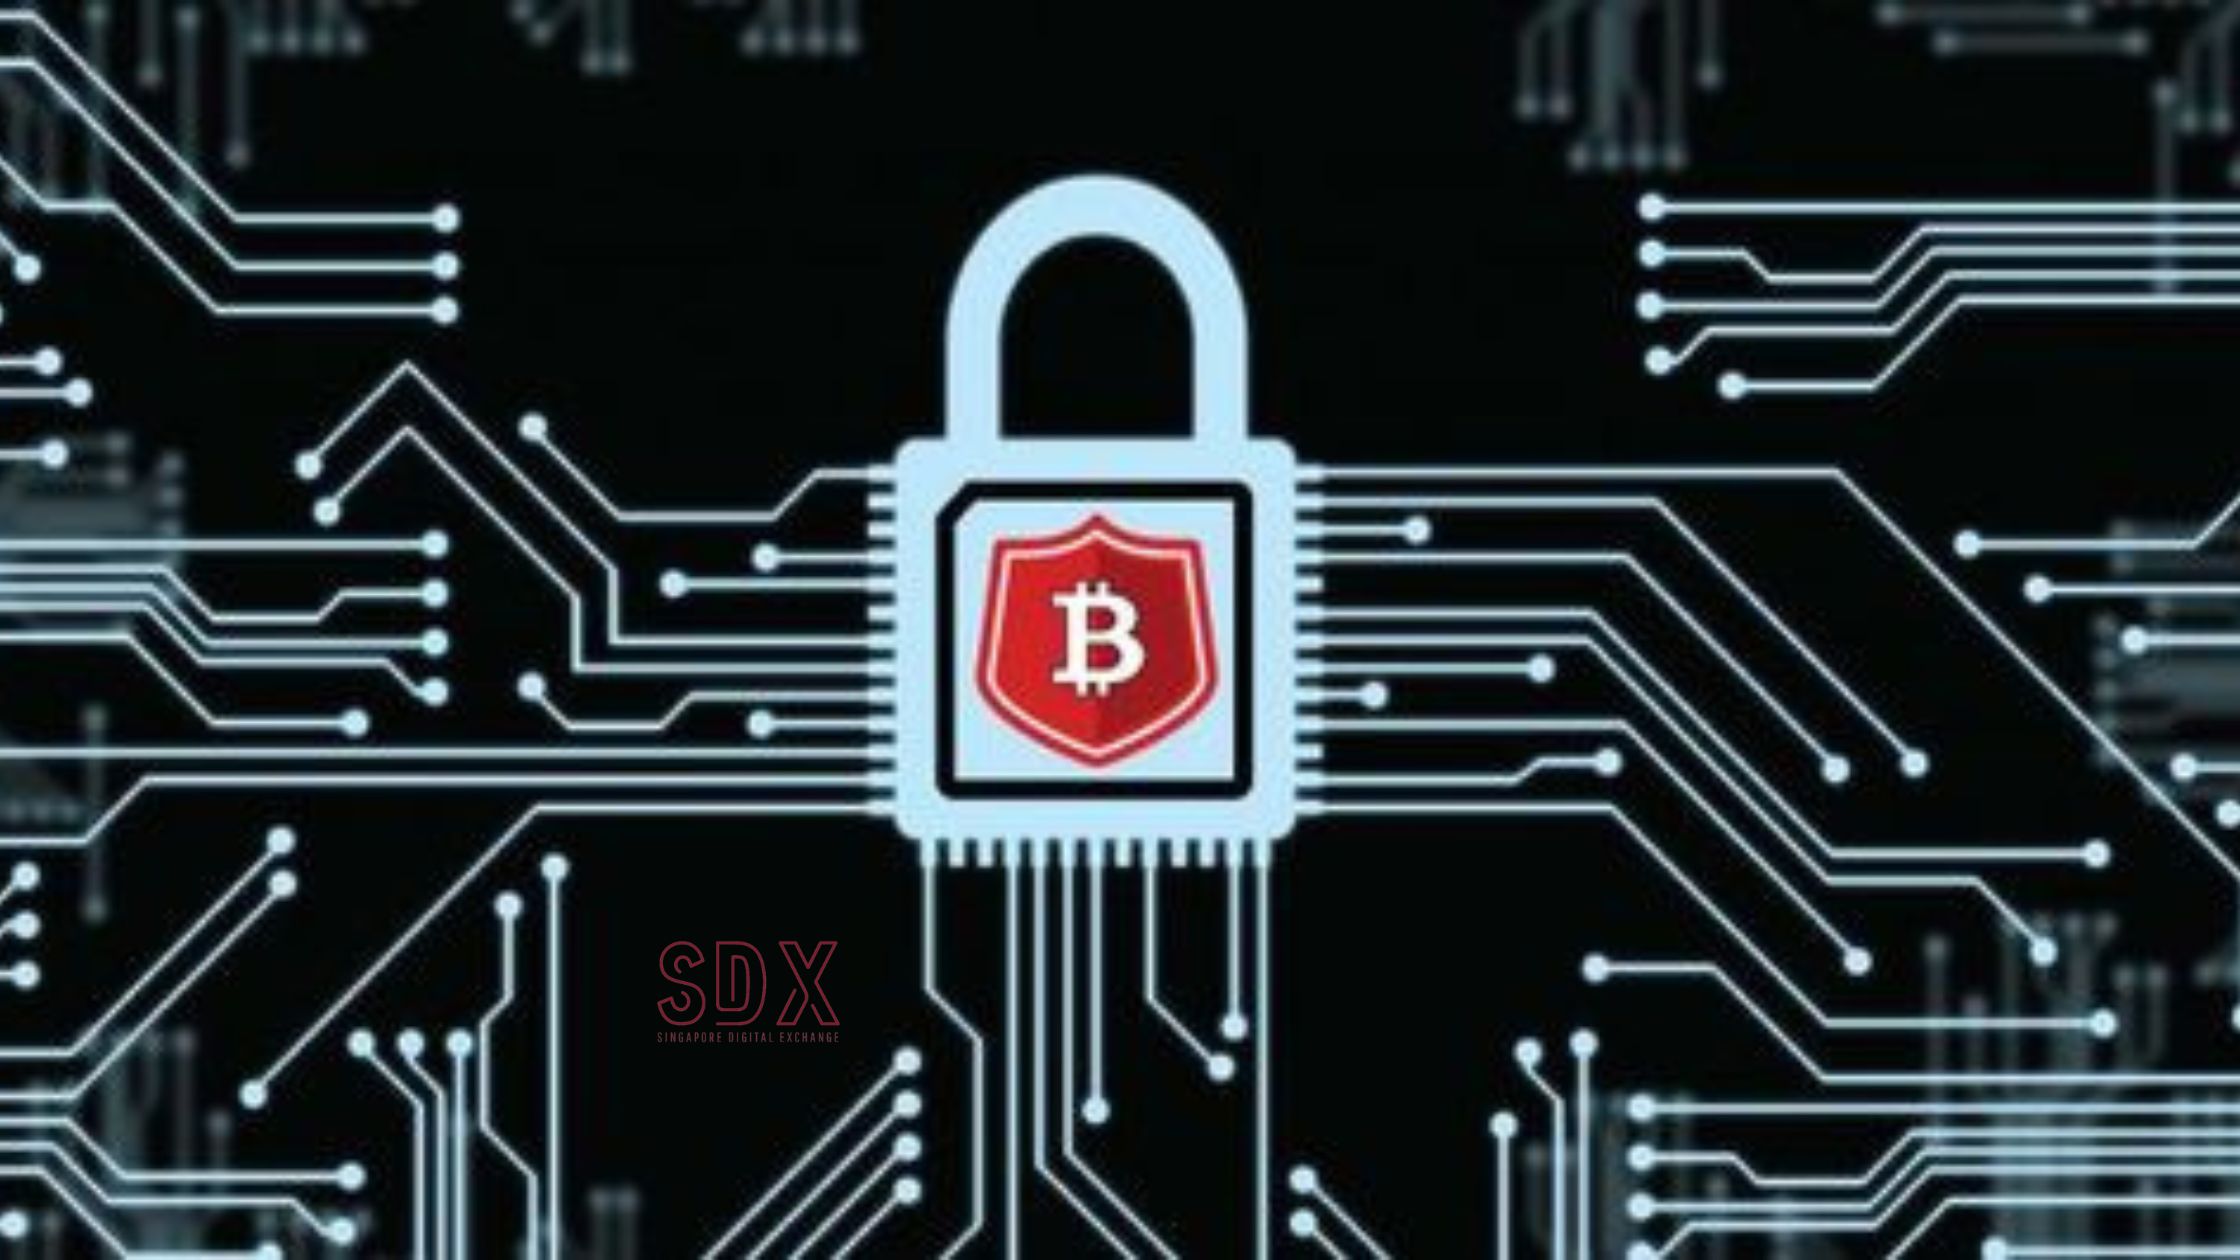 What makes the Bitcoin blockchain secure